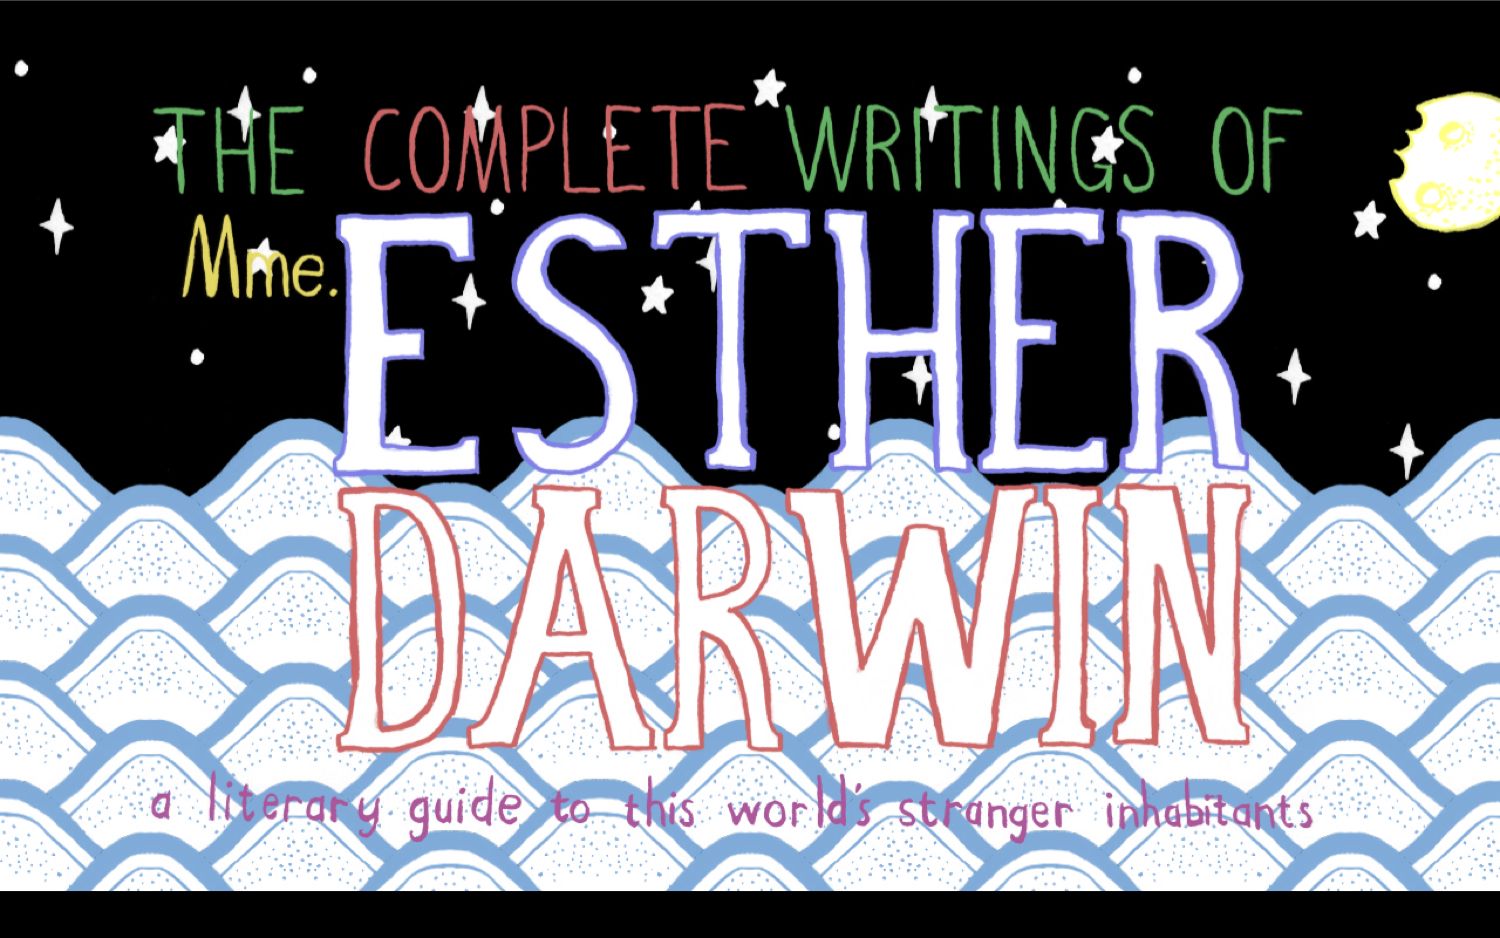 The Complete Writings of Mme. Esther Darwin 0.1 : Title